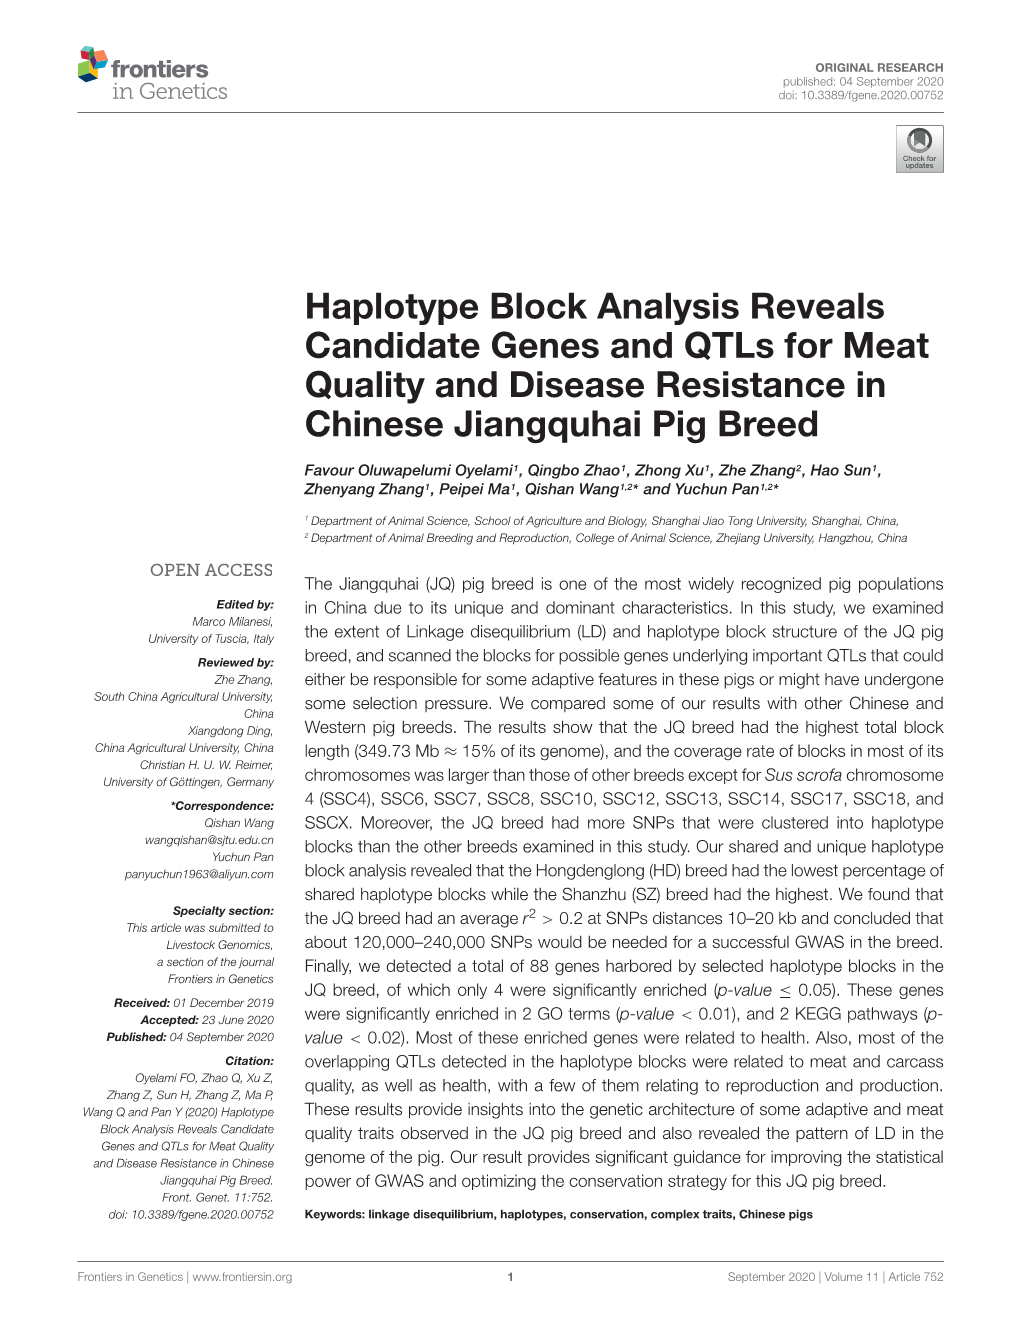 Haplotype Block Analysis Reveals Candidate Genes and Qtls for Meat Quality and Disease Resistance in Chinese Jiangquhai Pig Breed